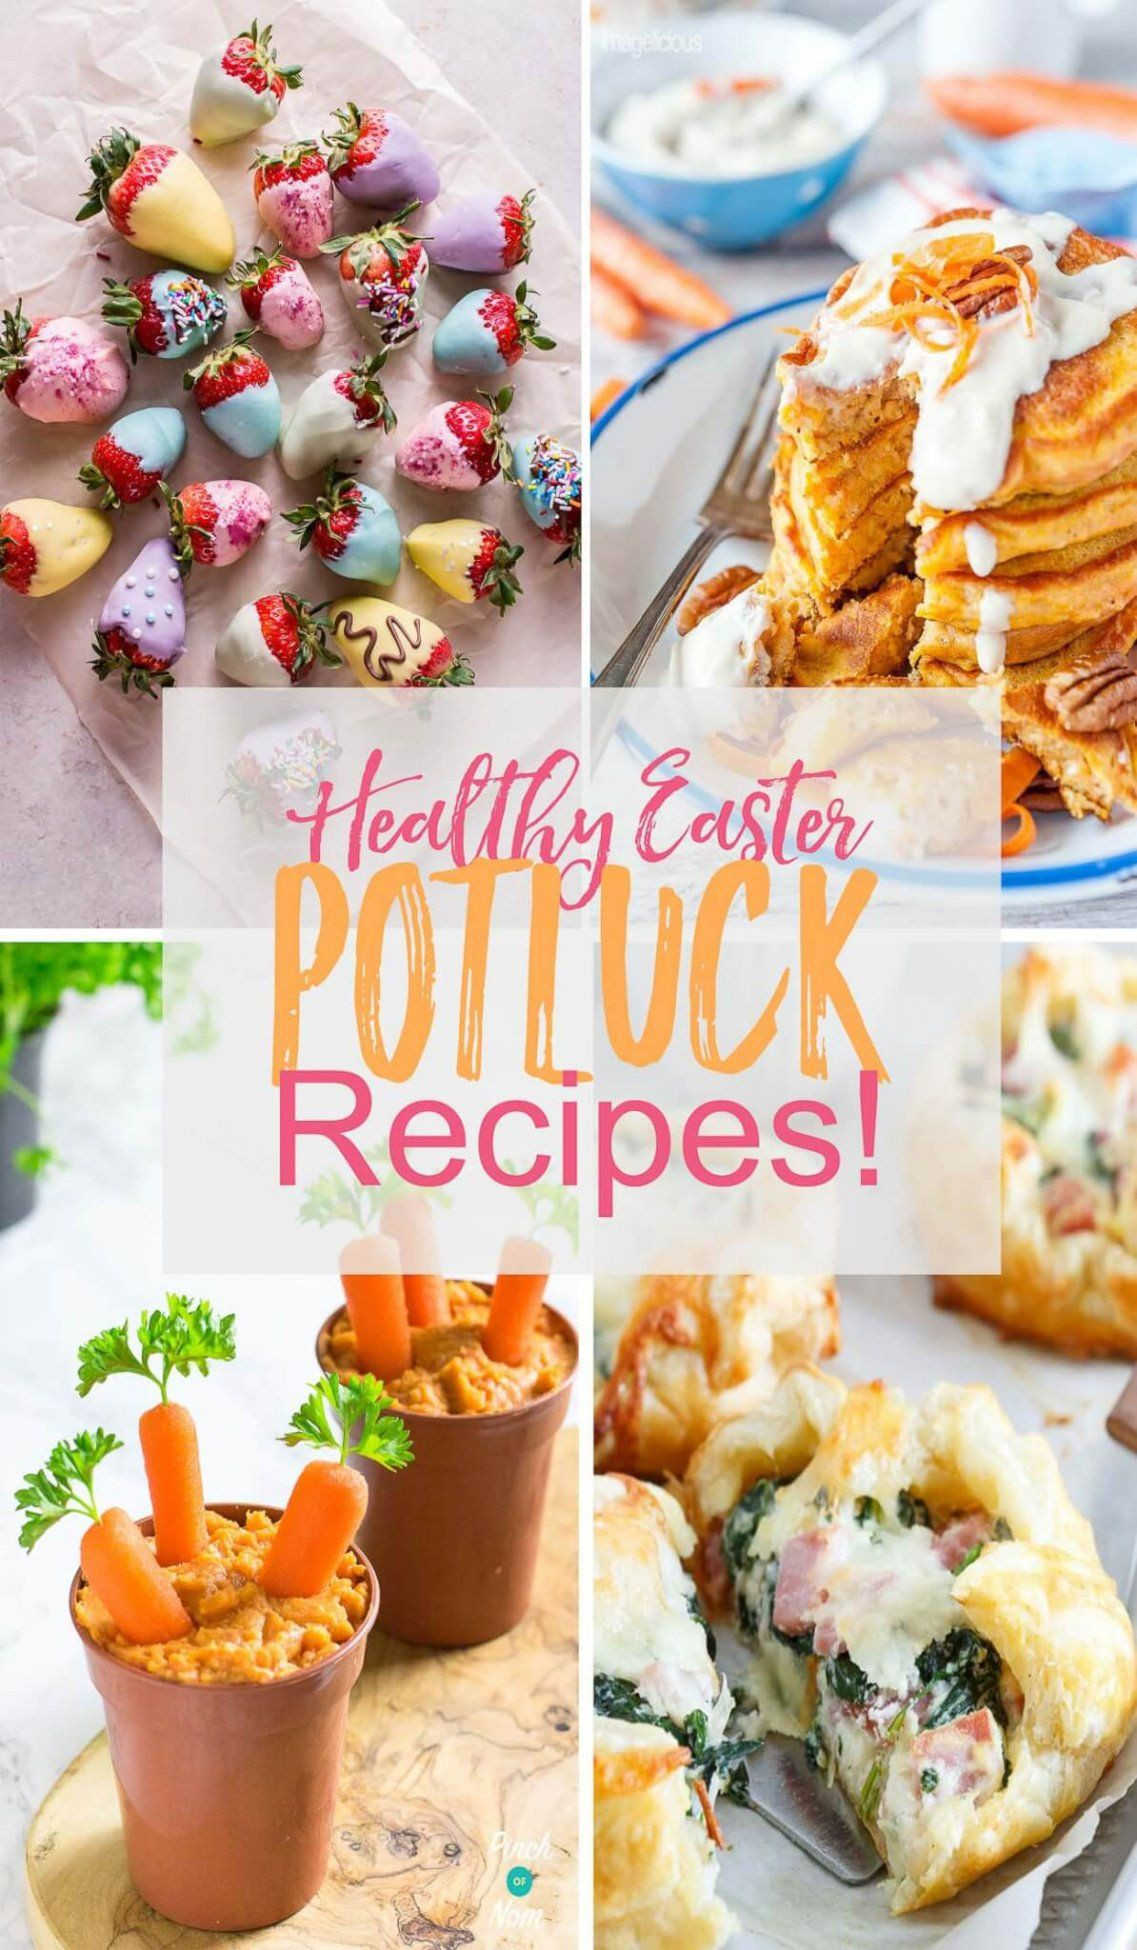 Easter Brunch Ideas For A Crowd
 These 13 Healthy Easter Brunch Potluck Recipes are